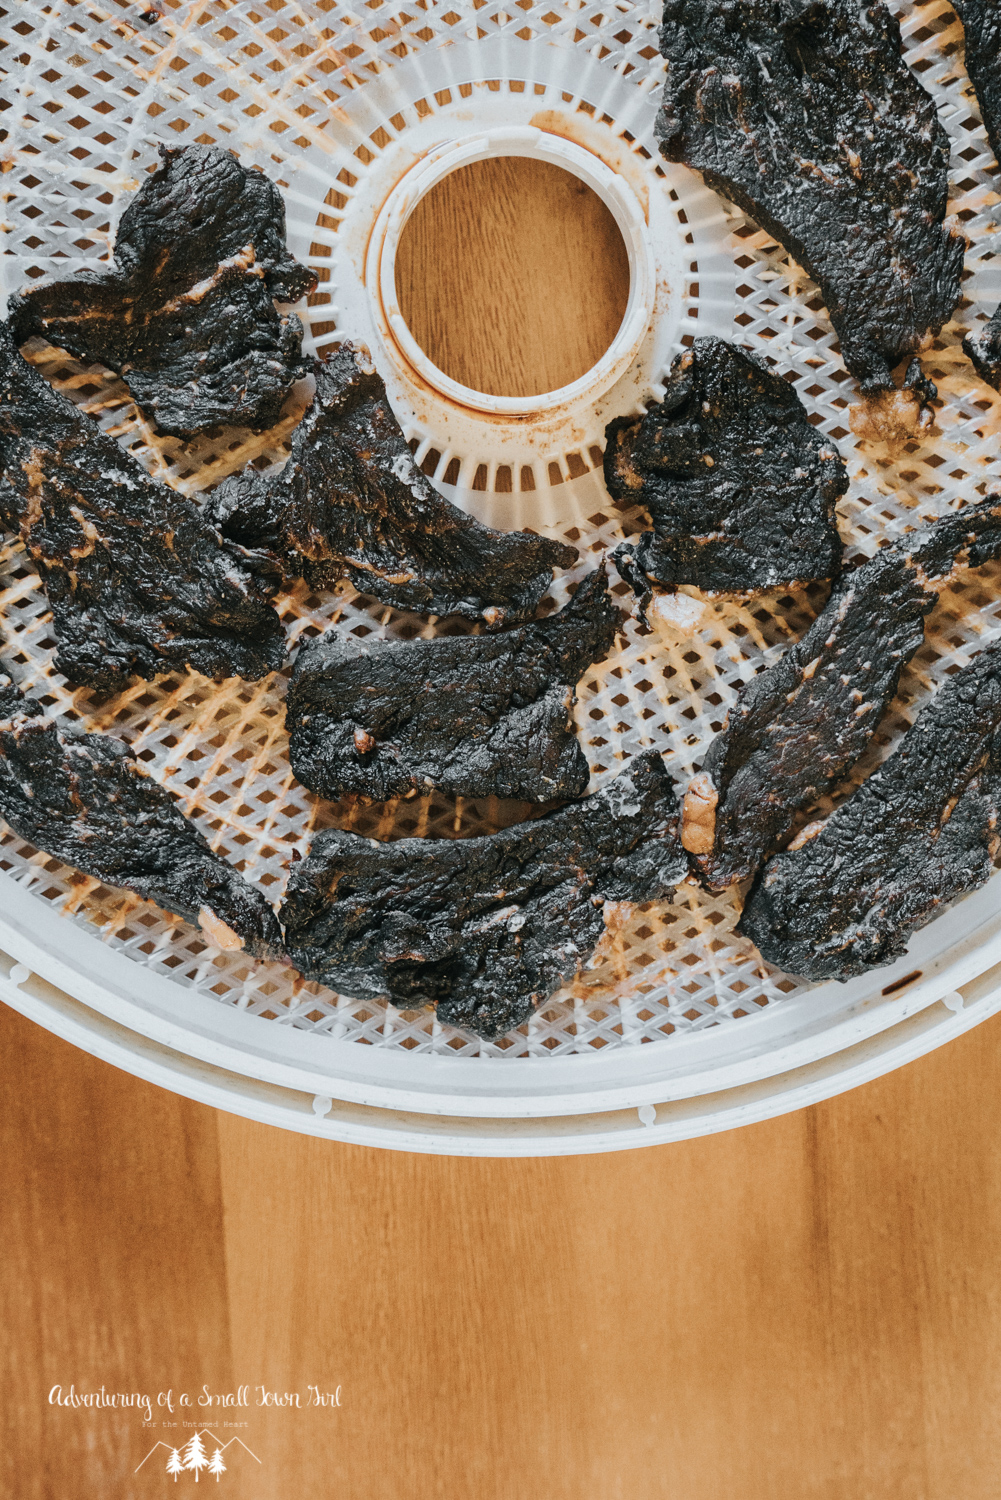 Original Beef Jerky Recipe by Adventuring of a Small Town Girl - Backpacking Recipes - Dehydrator Recipes - Recipes for adventures by ASTG